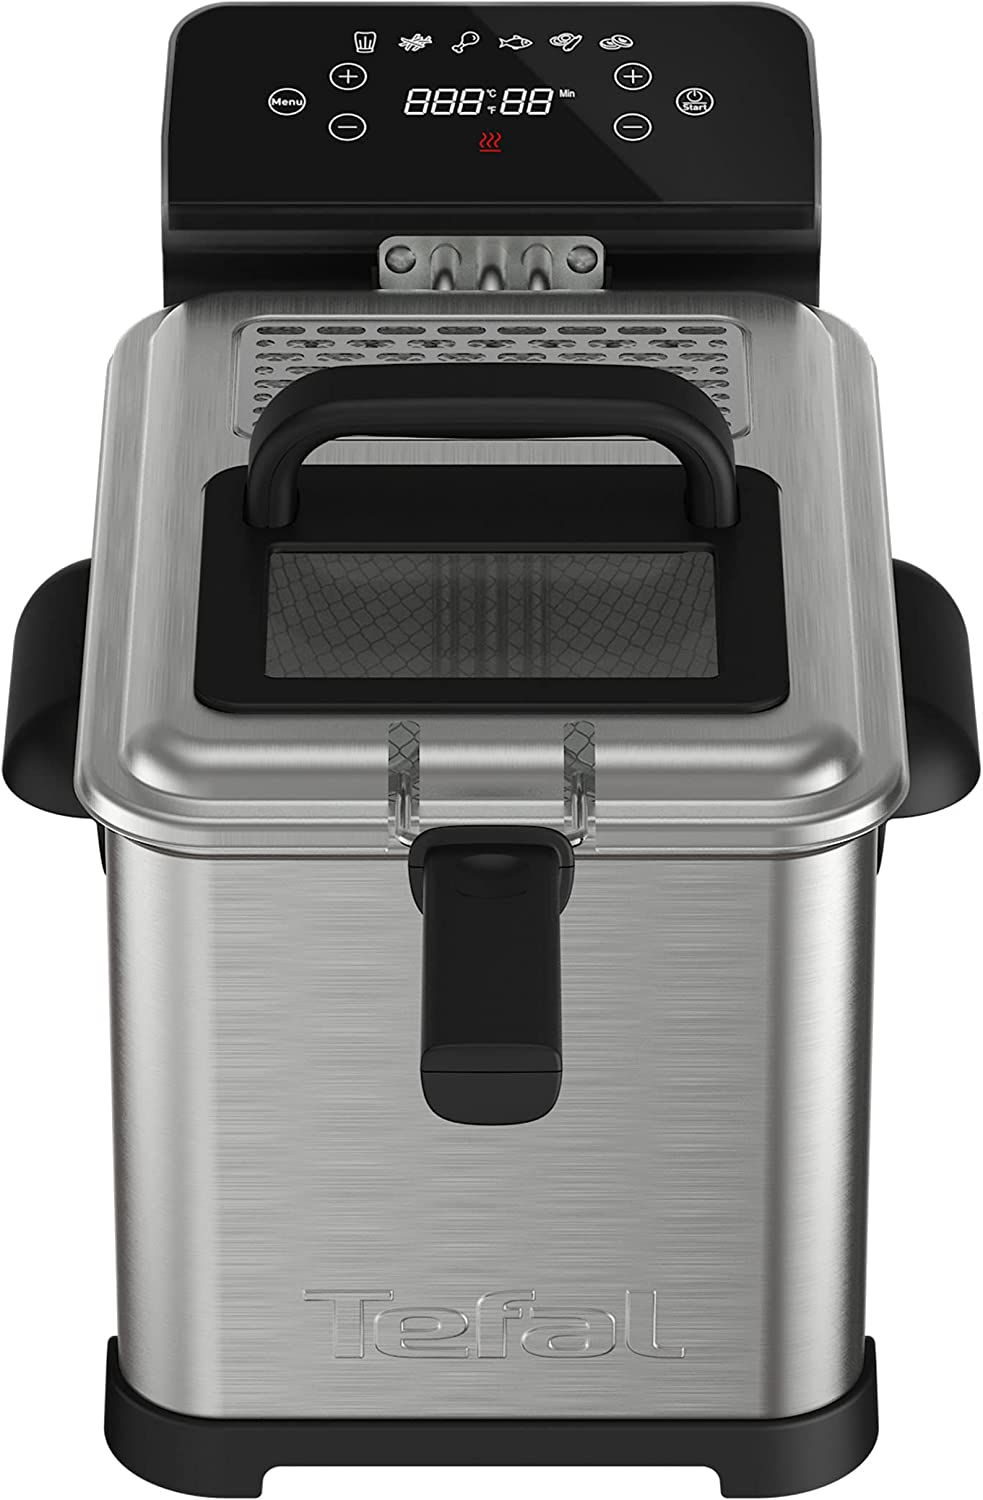 Tefal FR507D Family Pro Digital Electric Fryer | 4L Oil Capacity | Cooling Zone Technology | Dishwasher Safe Parts | Digital LED Screen with Touch Panel | Black/Stainless Steel